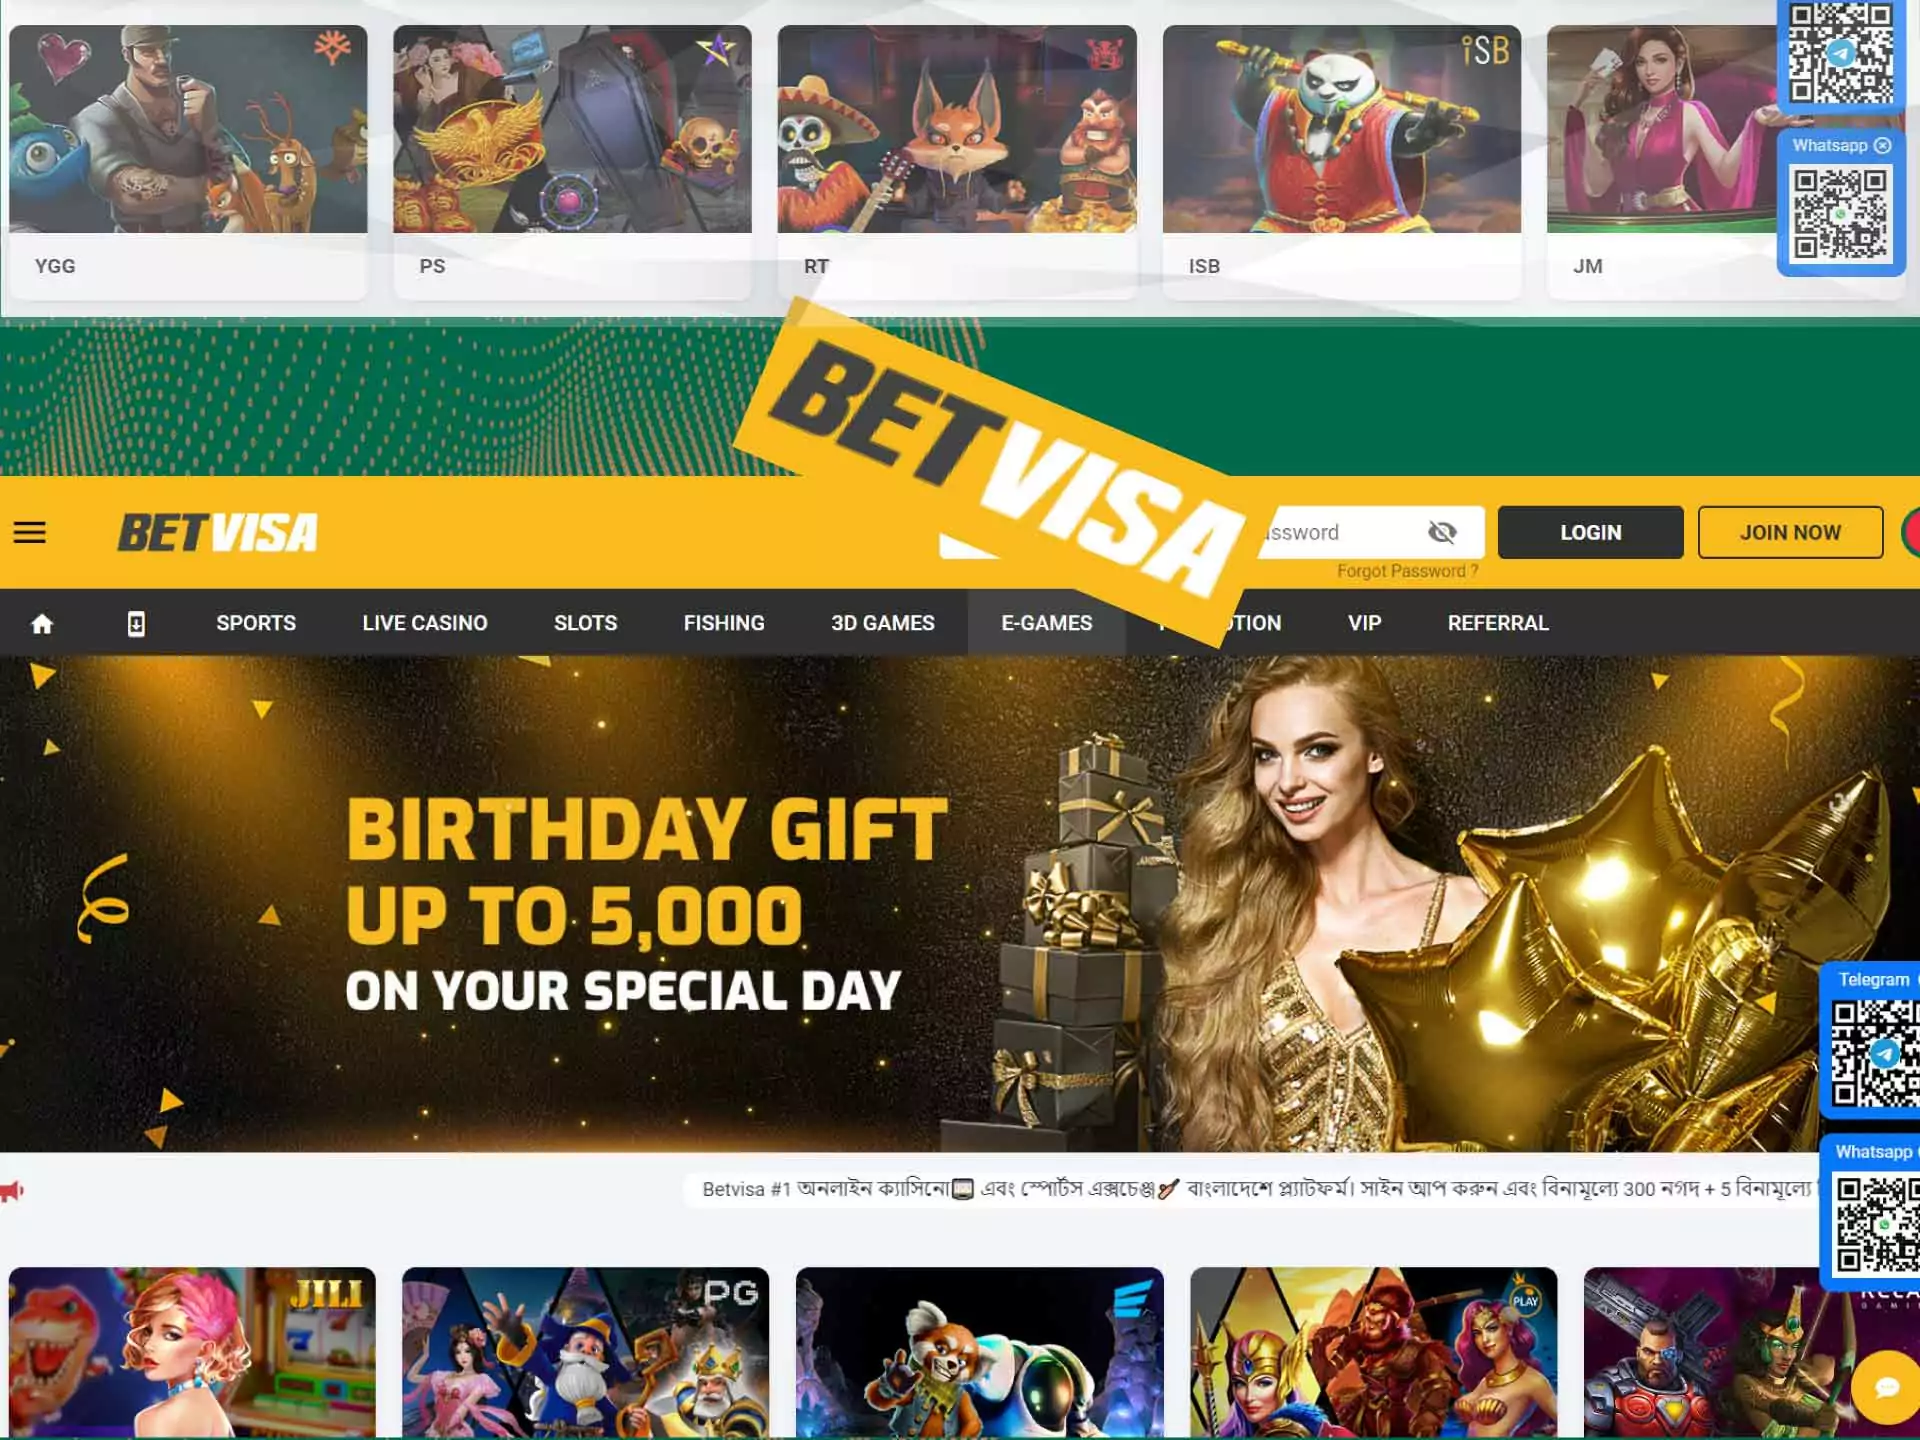 Sign up for BetVisa and place bets or play casino games.